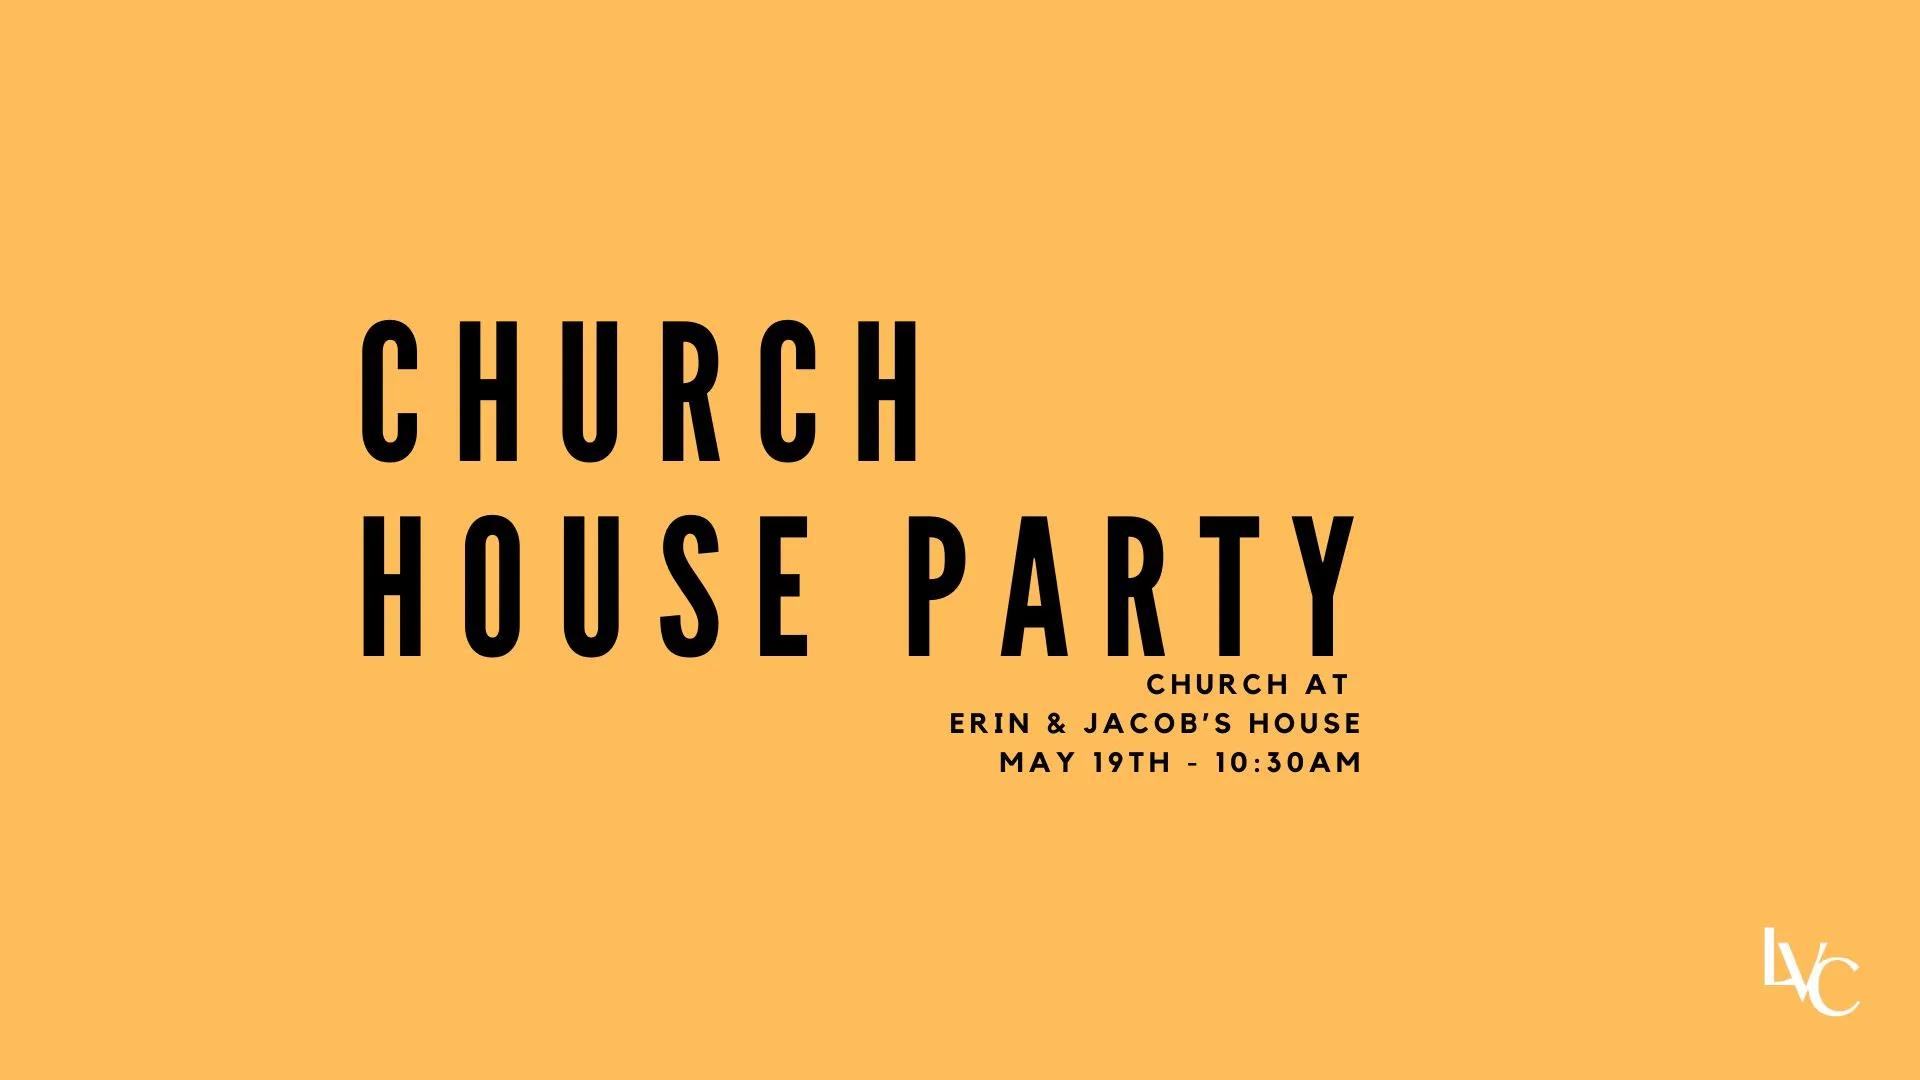 A yellow graphic with church house party written on it